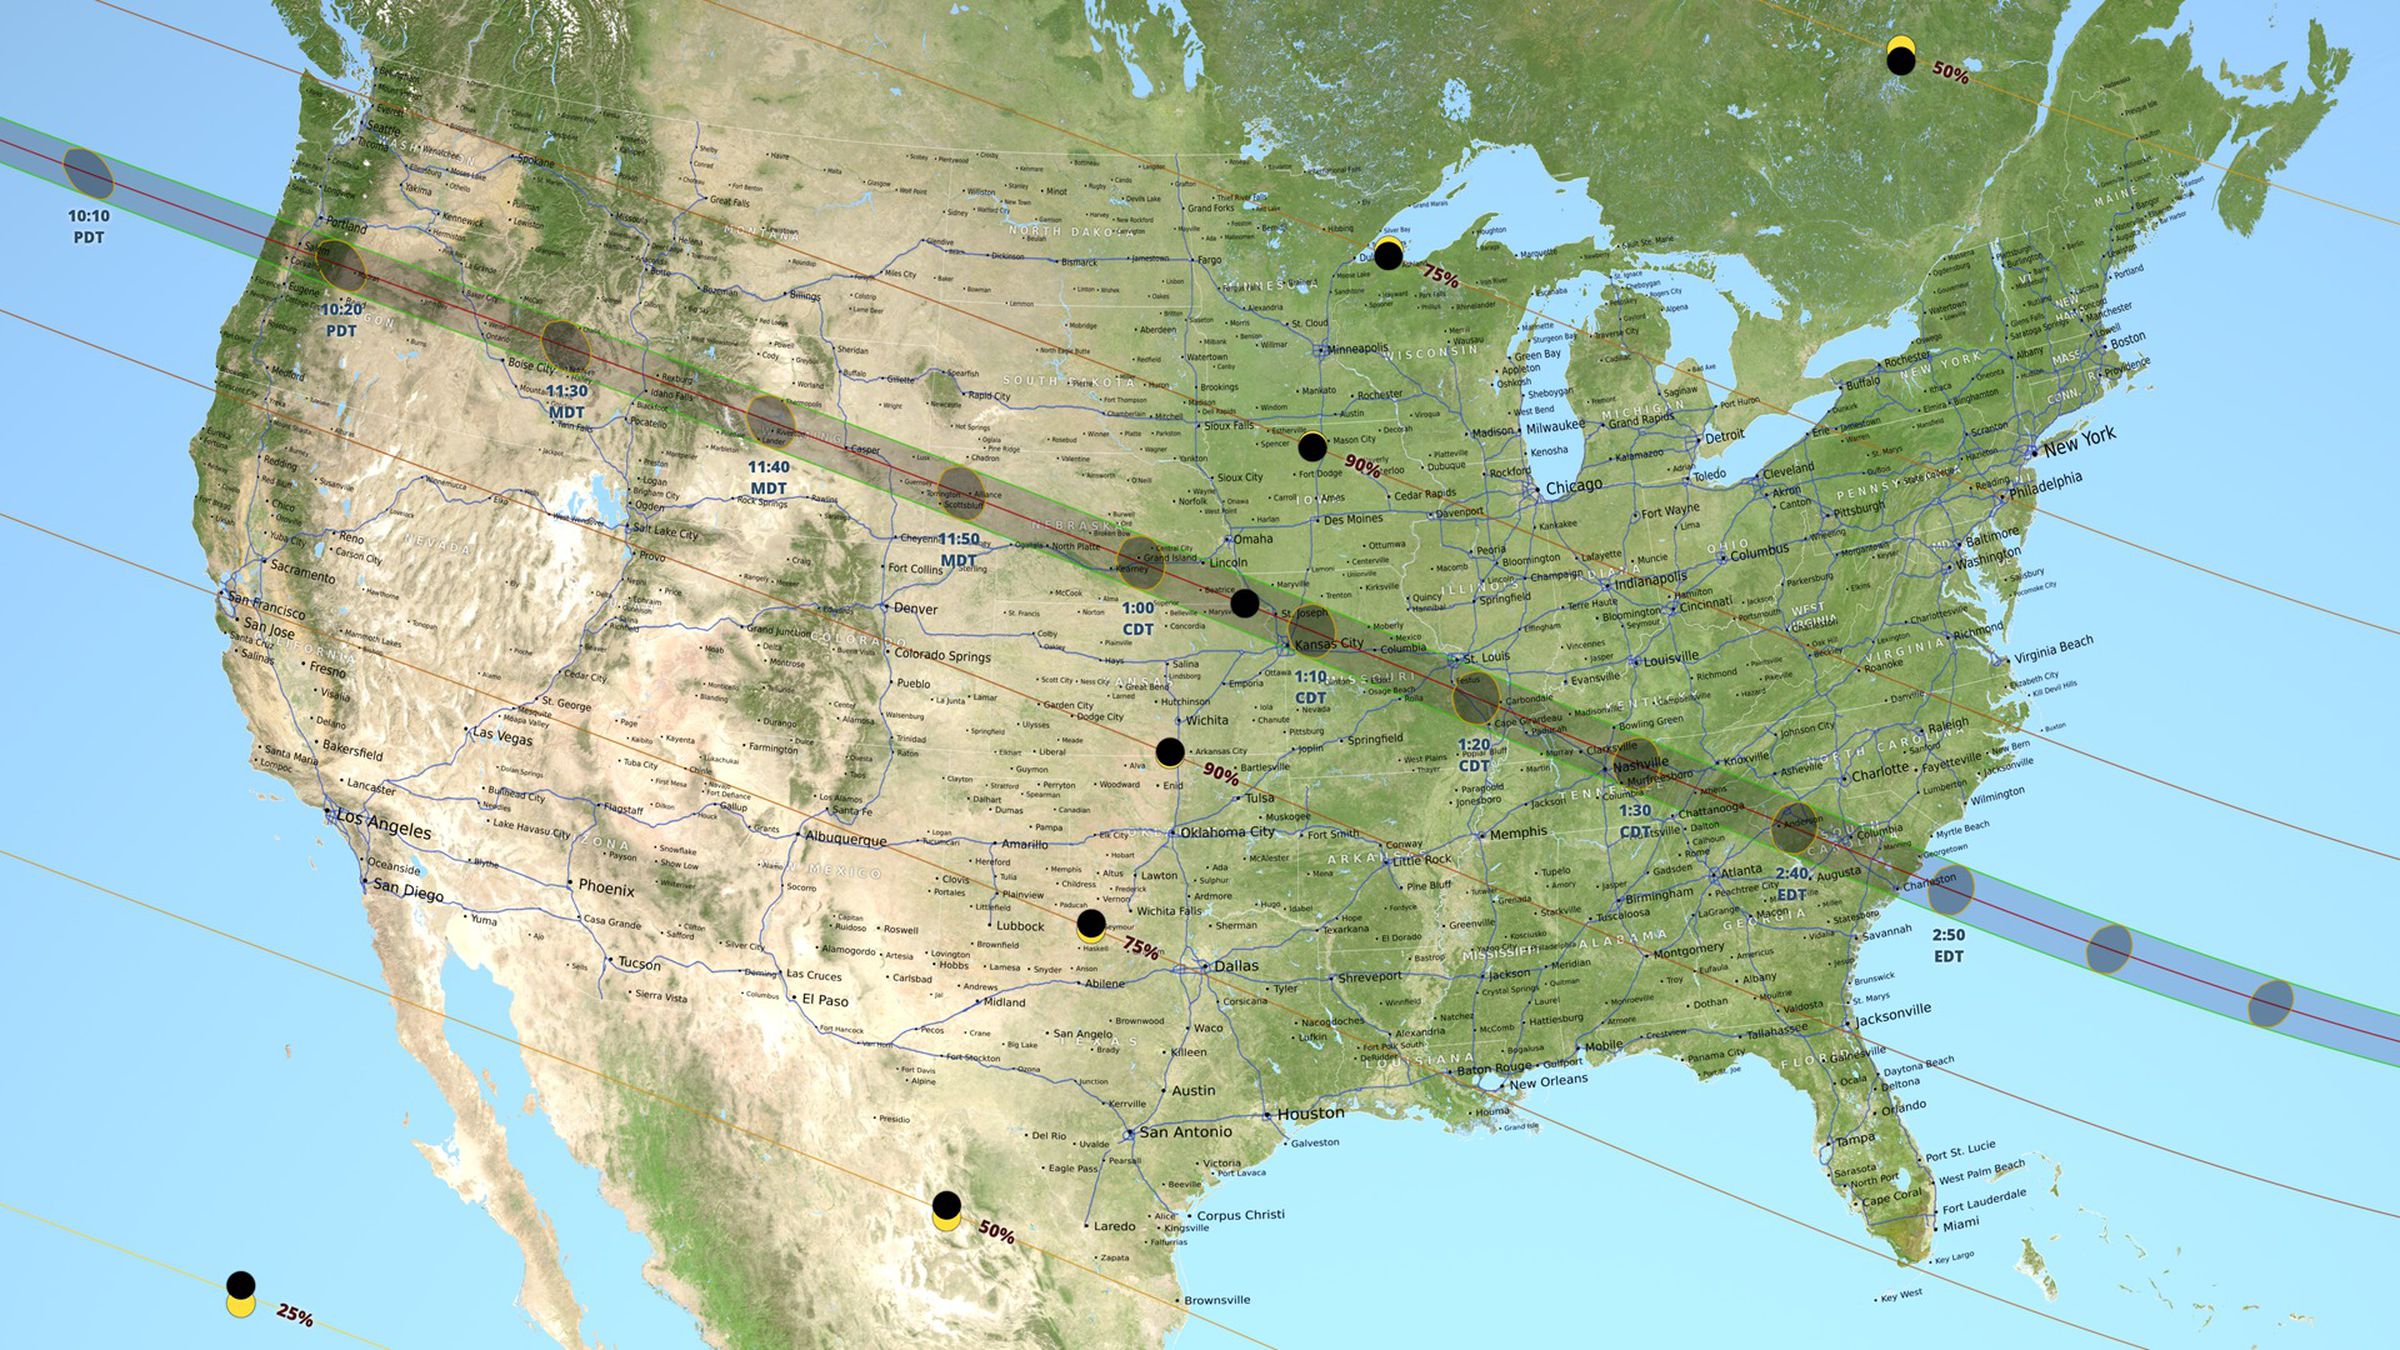 A map showing the path of the total solar eclipse on August 21st.